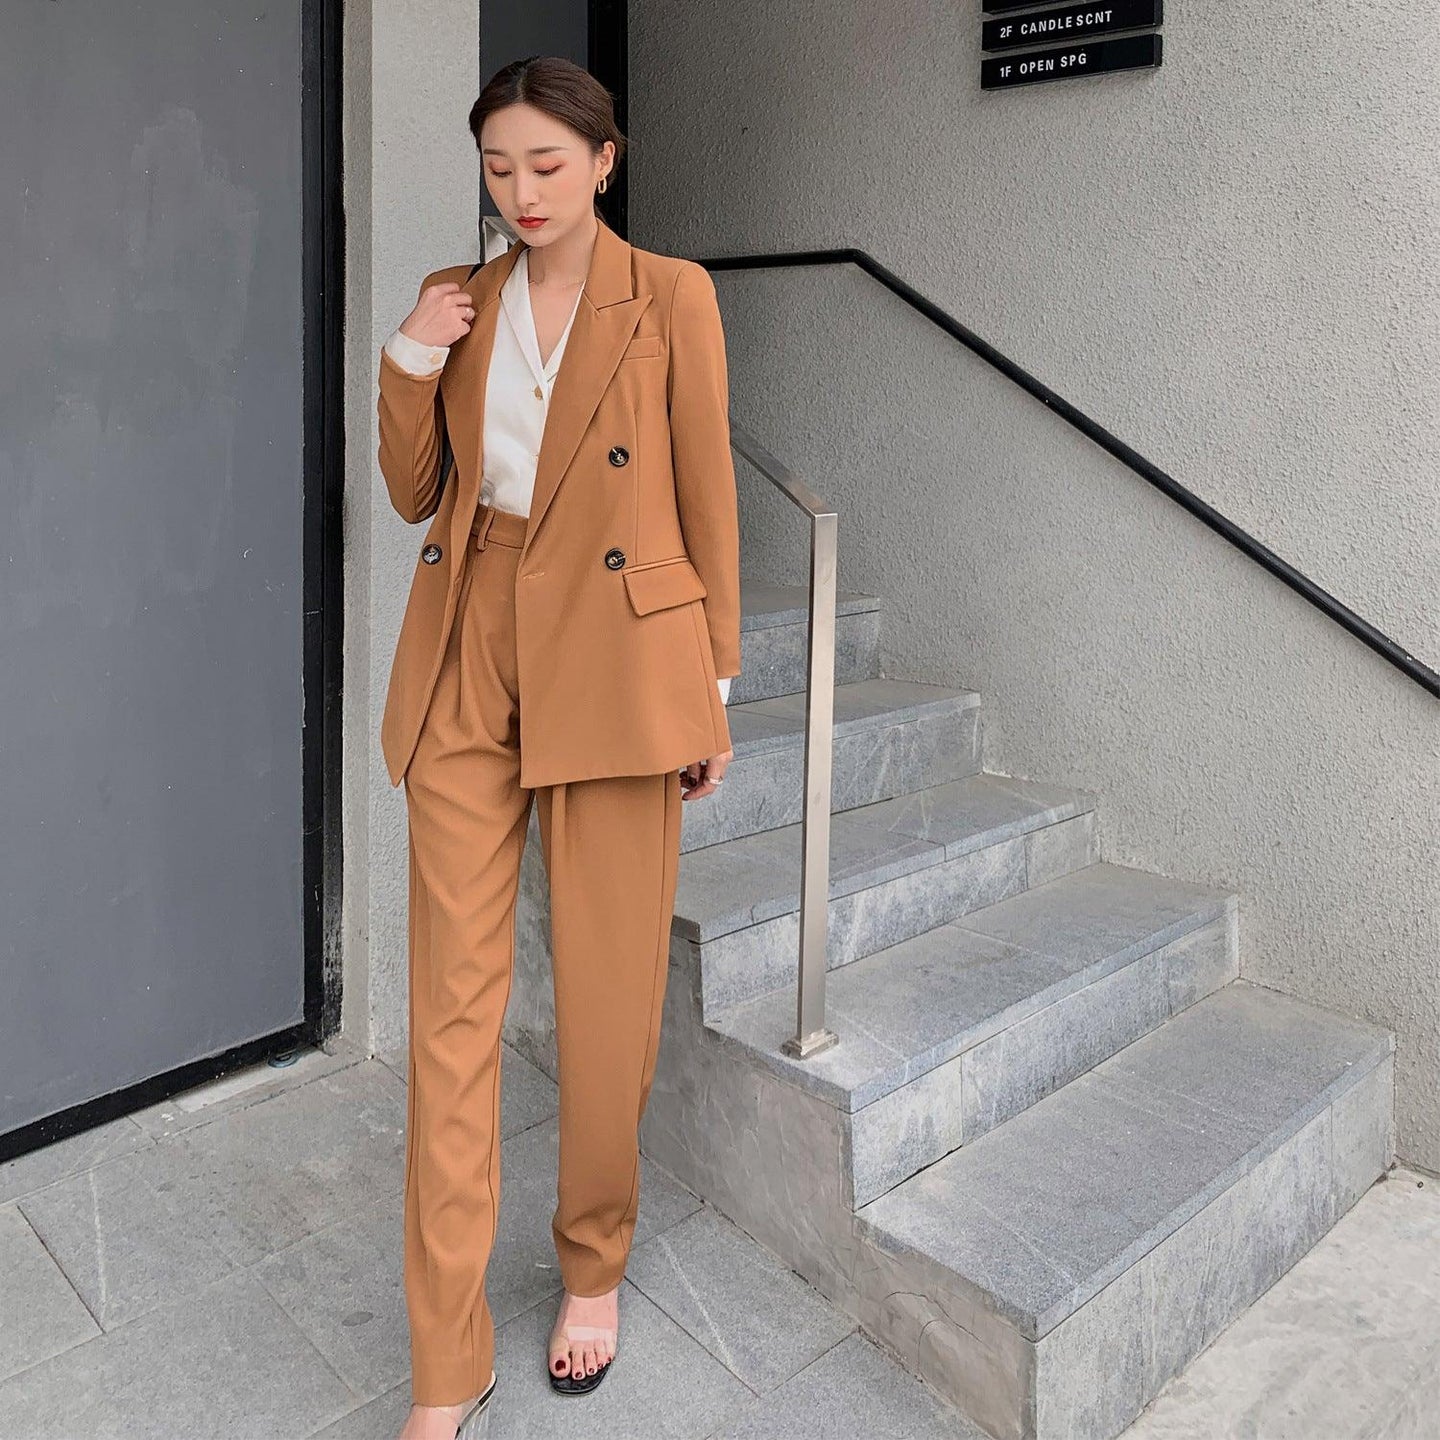 Women's casual professional suits - Curtis & Ivory